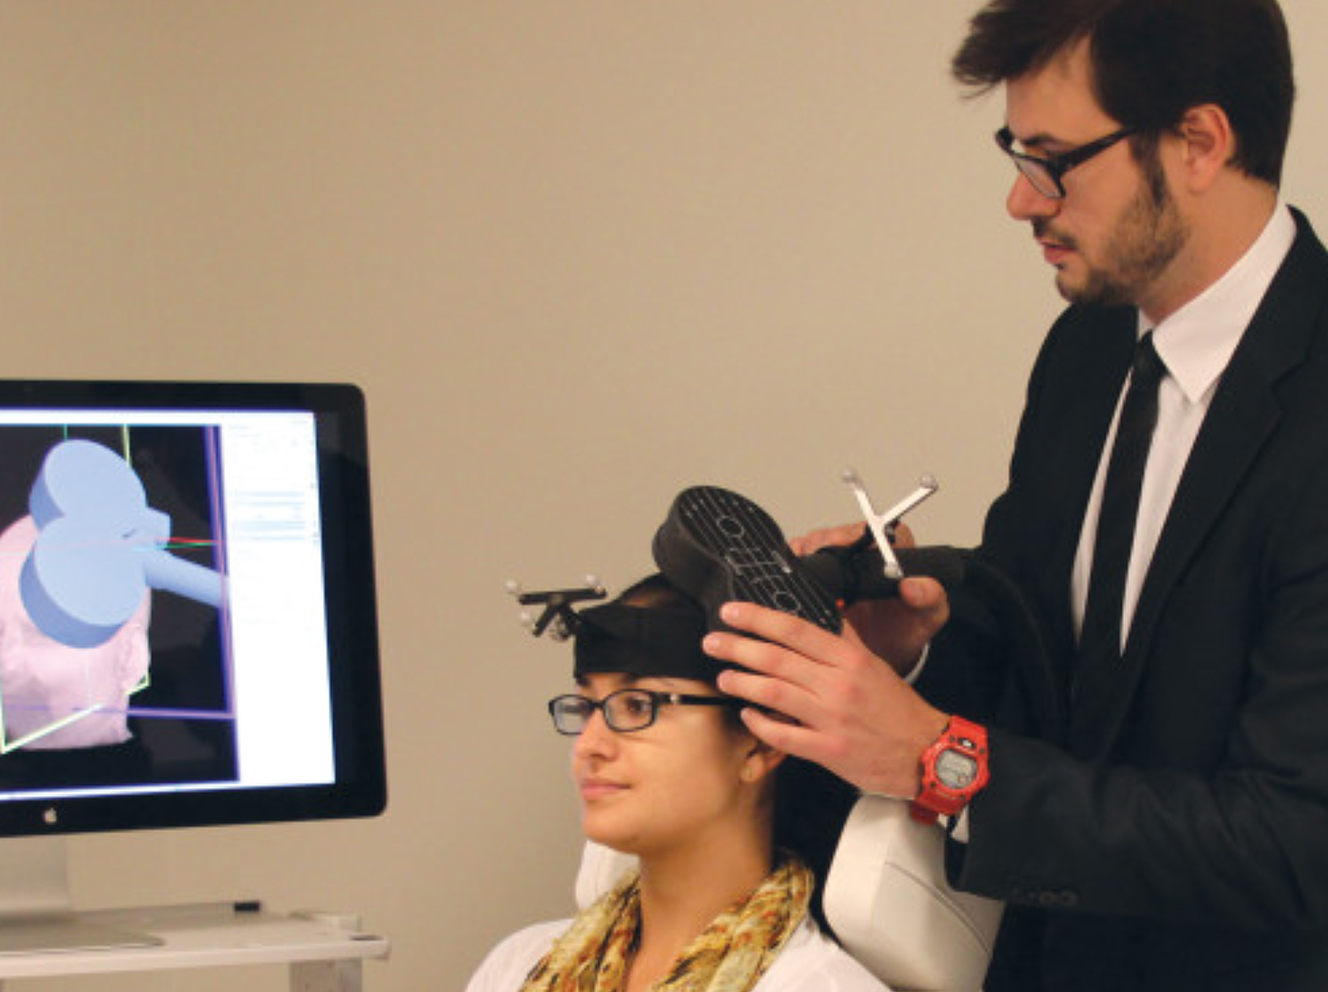 TMS Offers New Hope for Patients Suffering from Depression